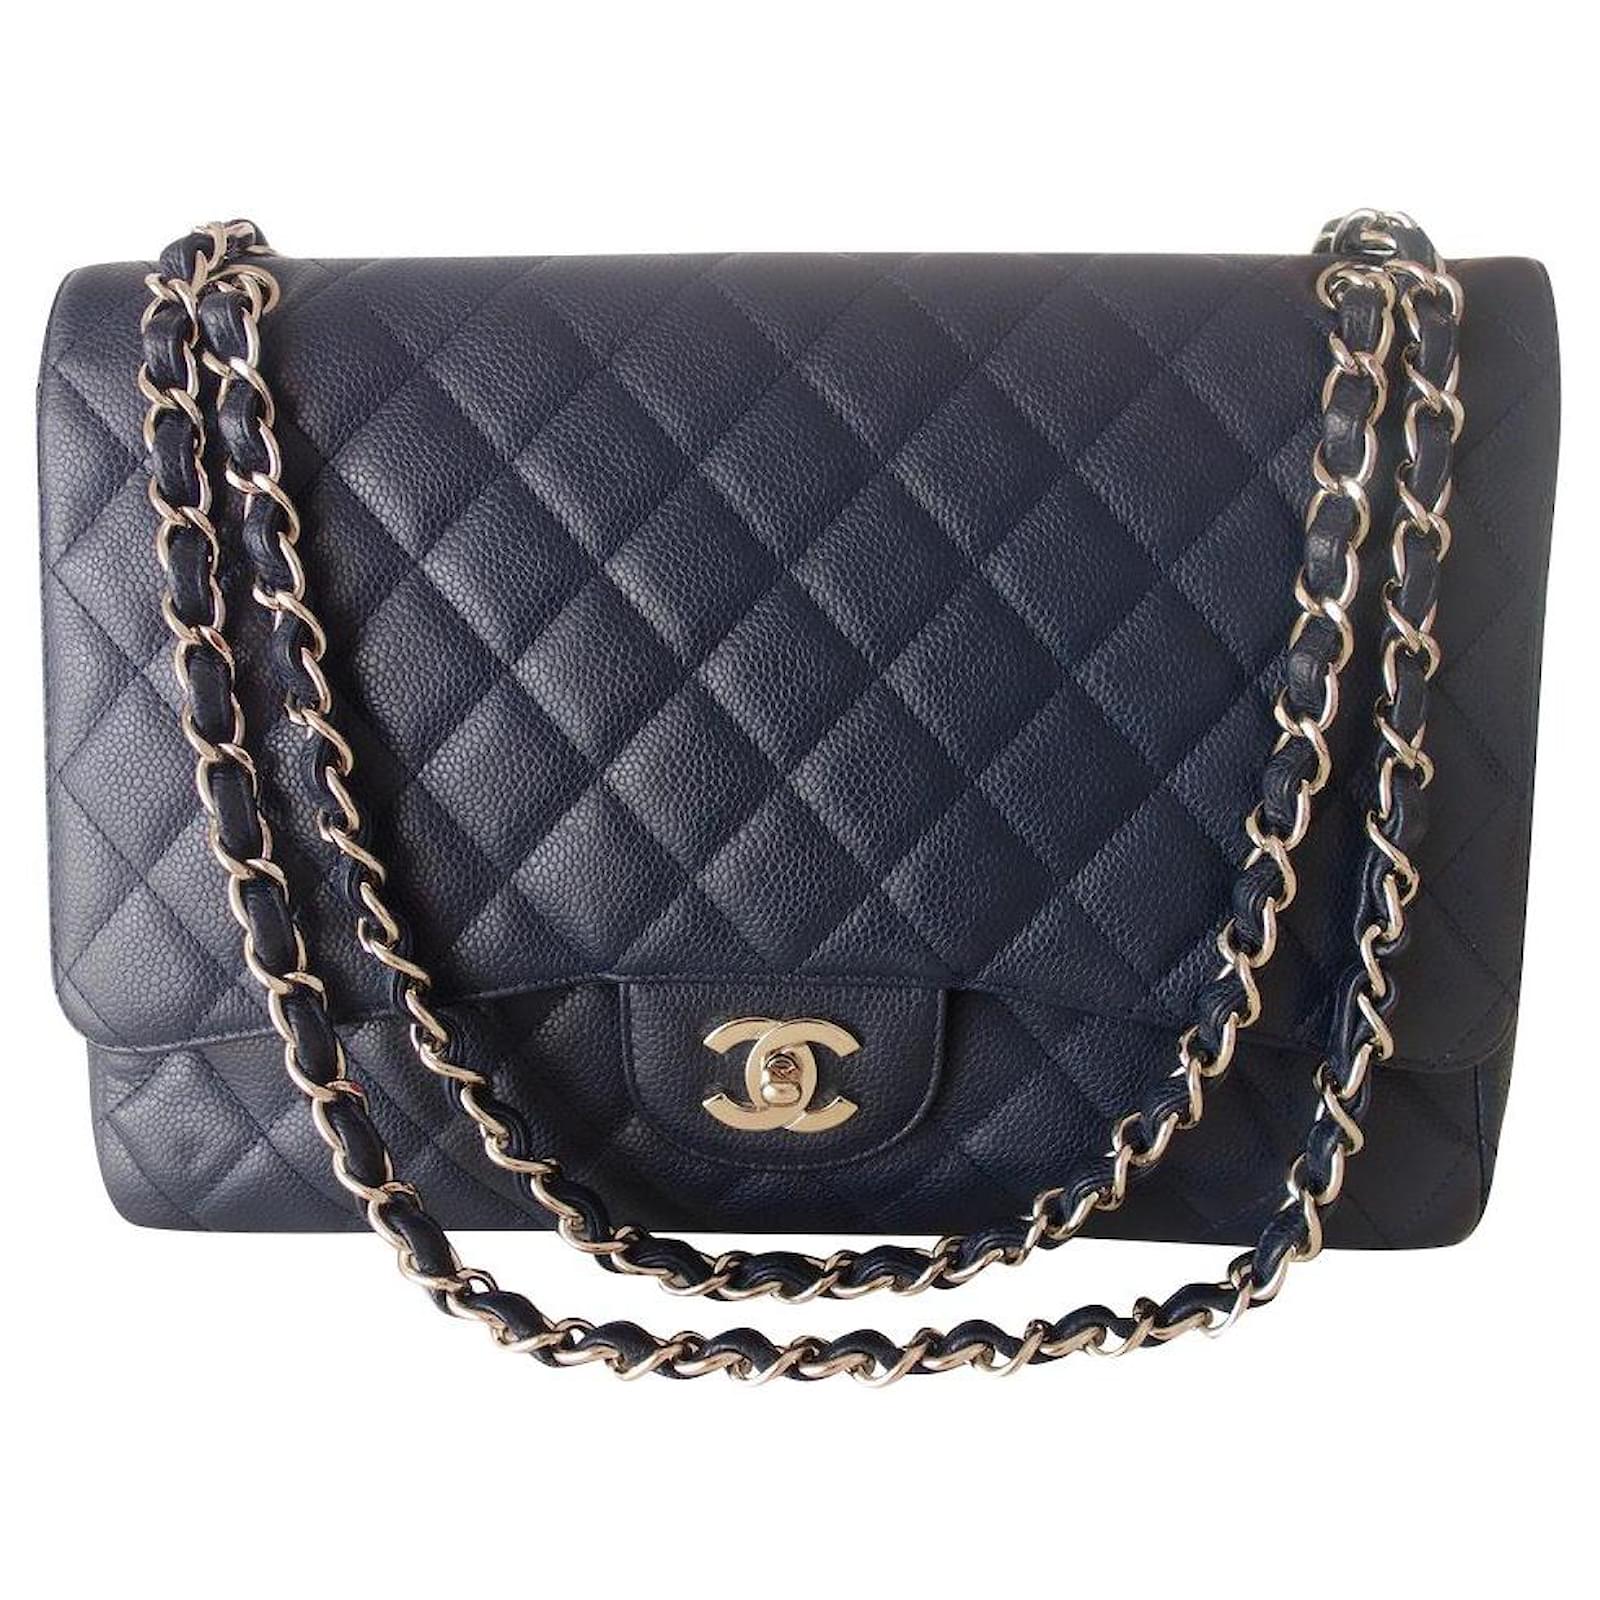 Timeless classique top handle leather handbag Chanel Blue in